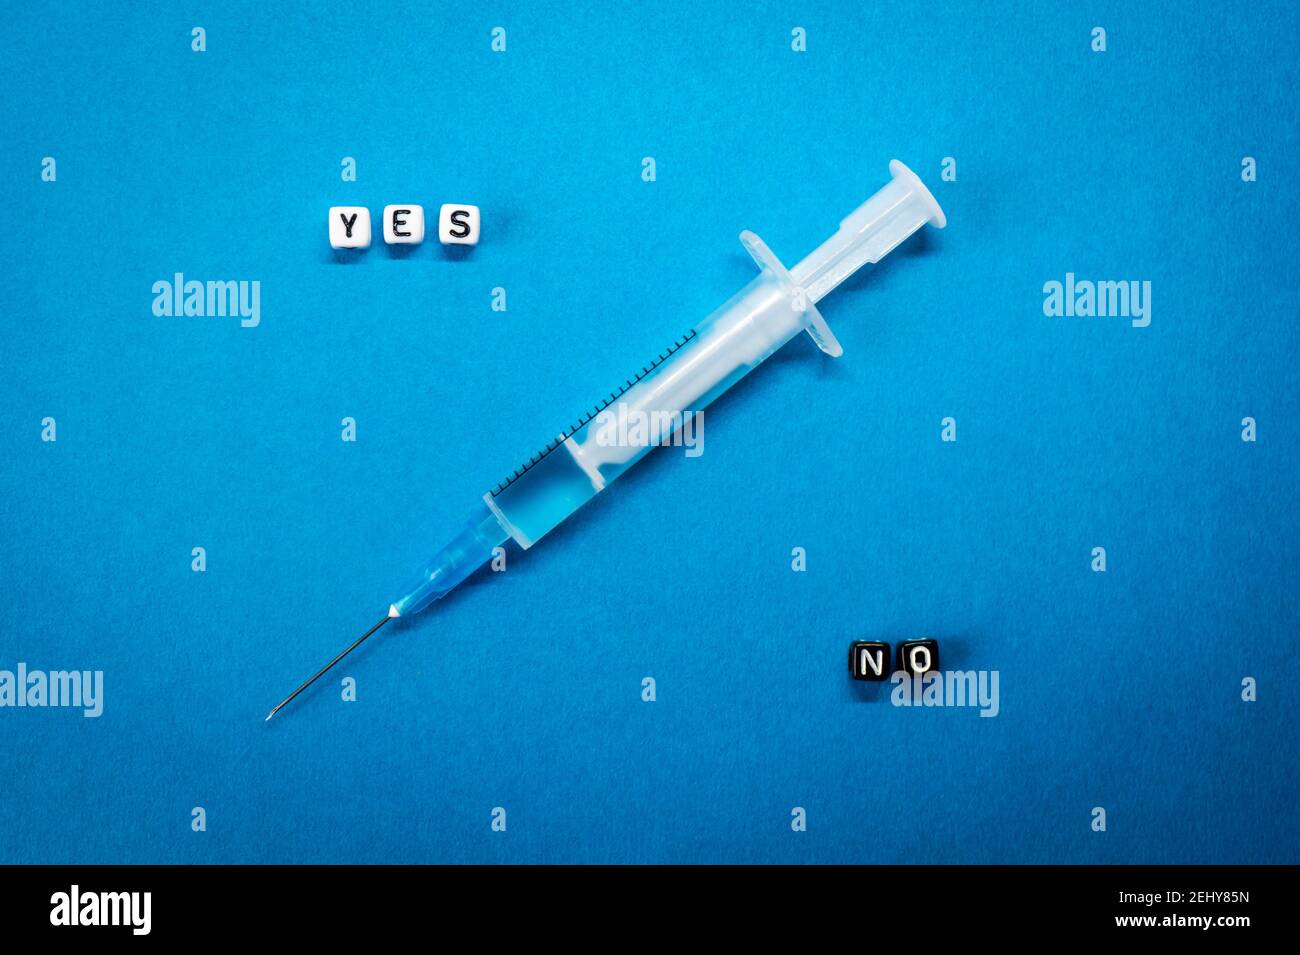 Yes No words made of square letters and a syringe on blue background. Pros and cons of coronavirus vaccine, concerns and doubts about vaccination Stock Photo